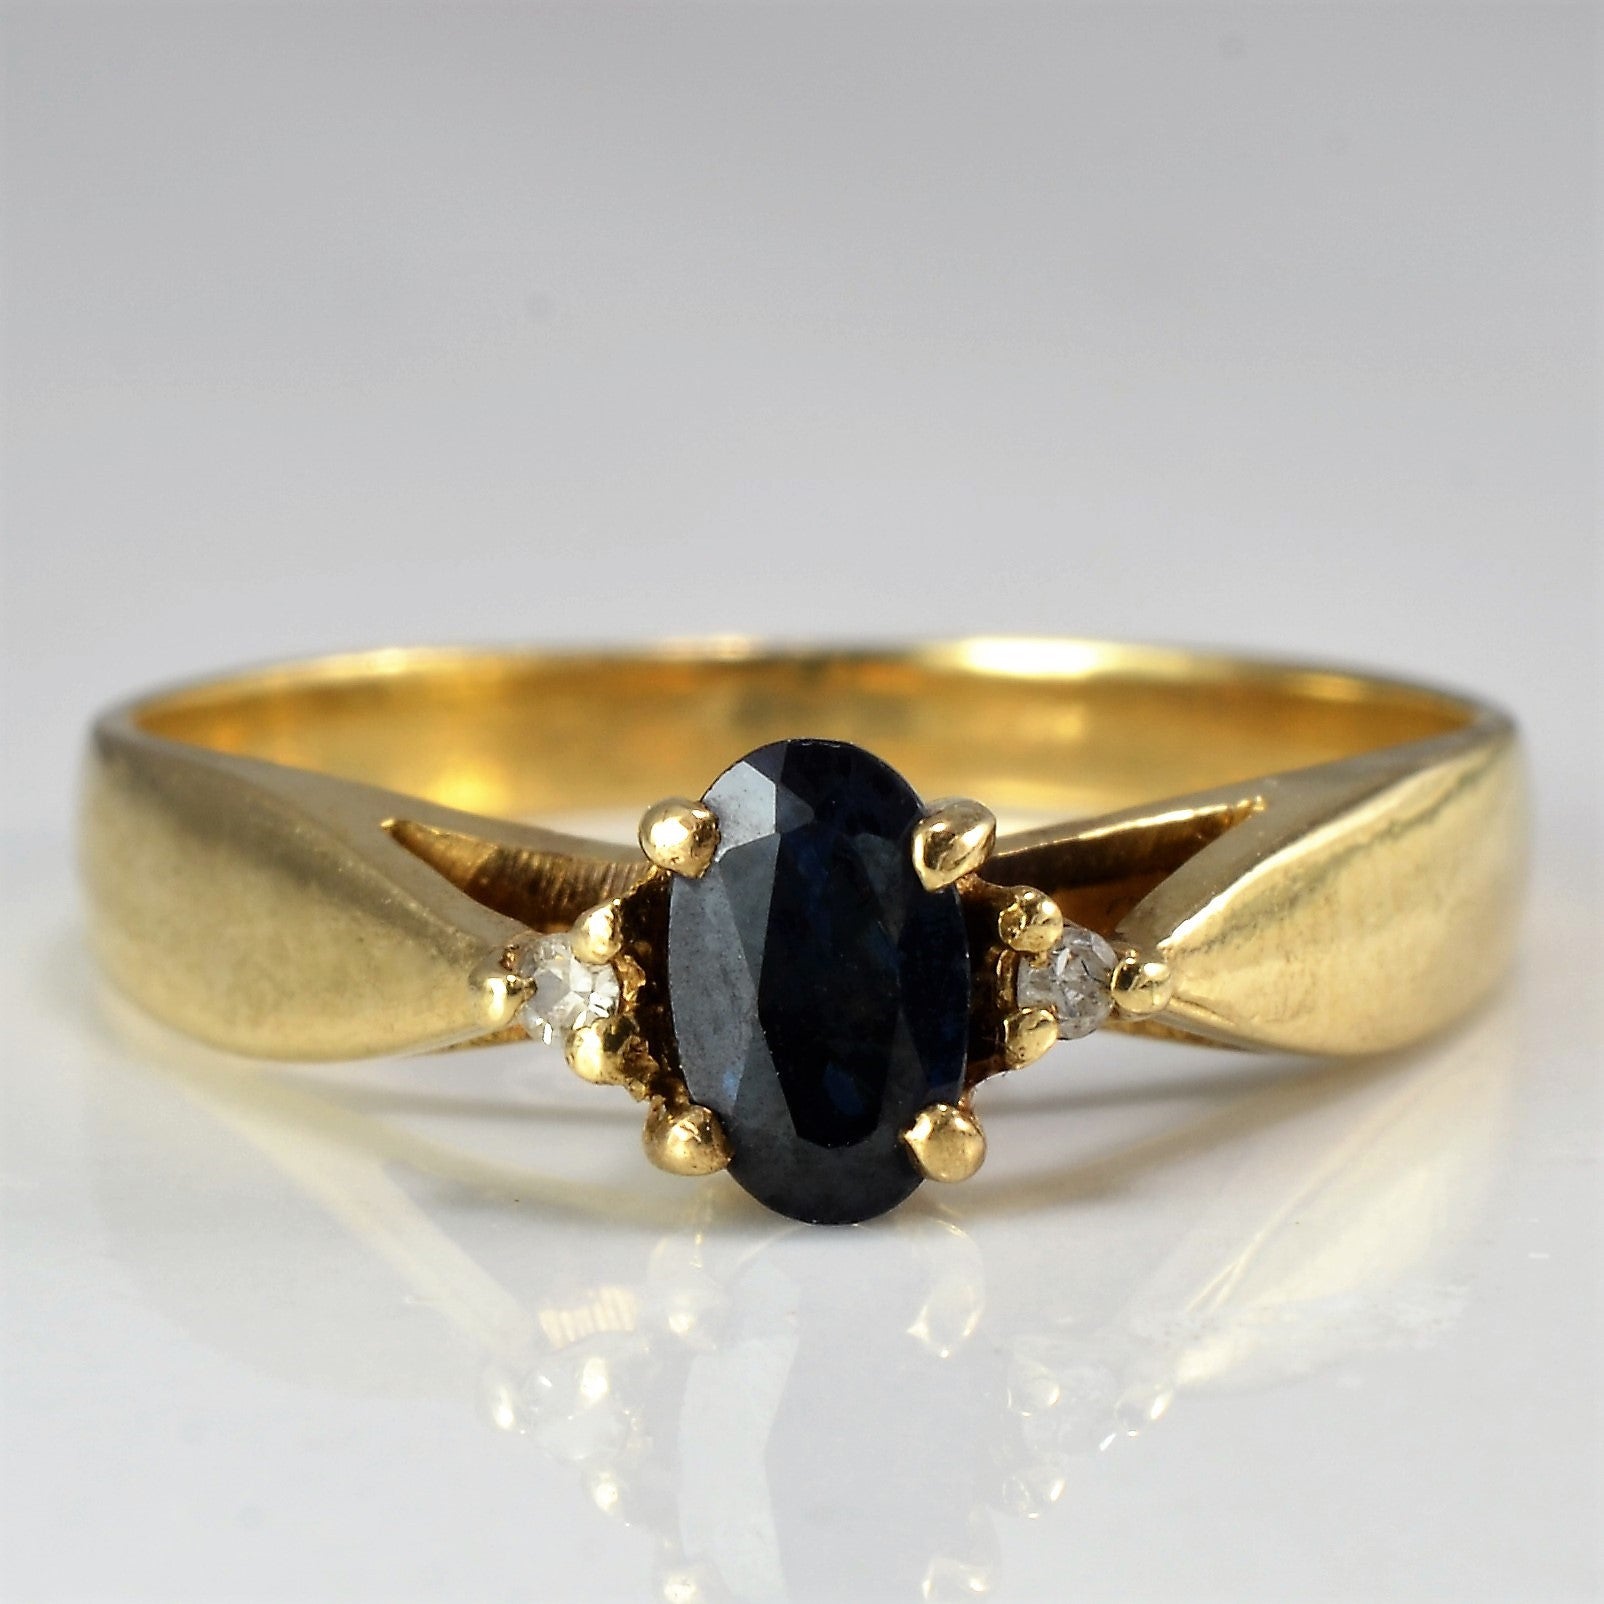 Tapered Oval Cut Sapphire Ring | 0.01 ctw, SZ 5.5 |